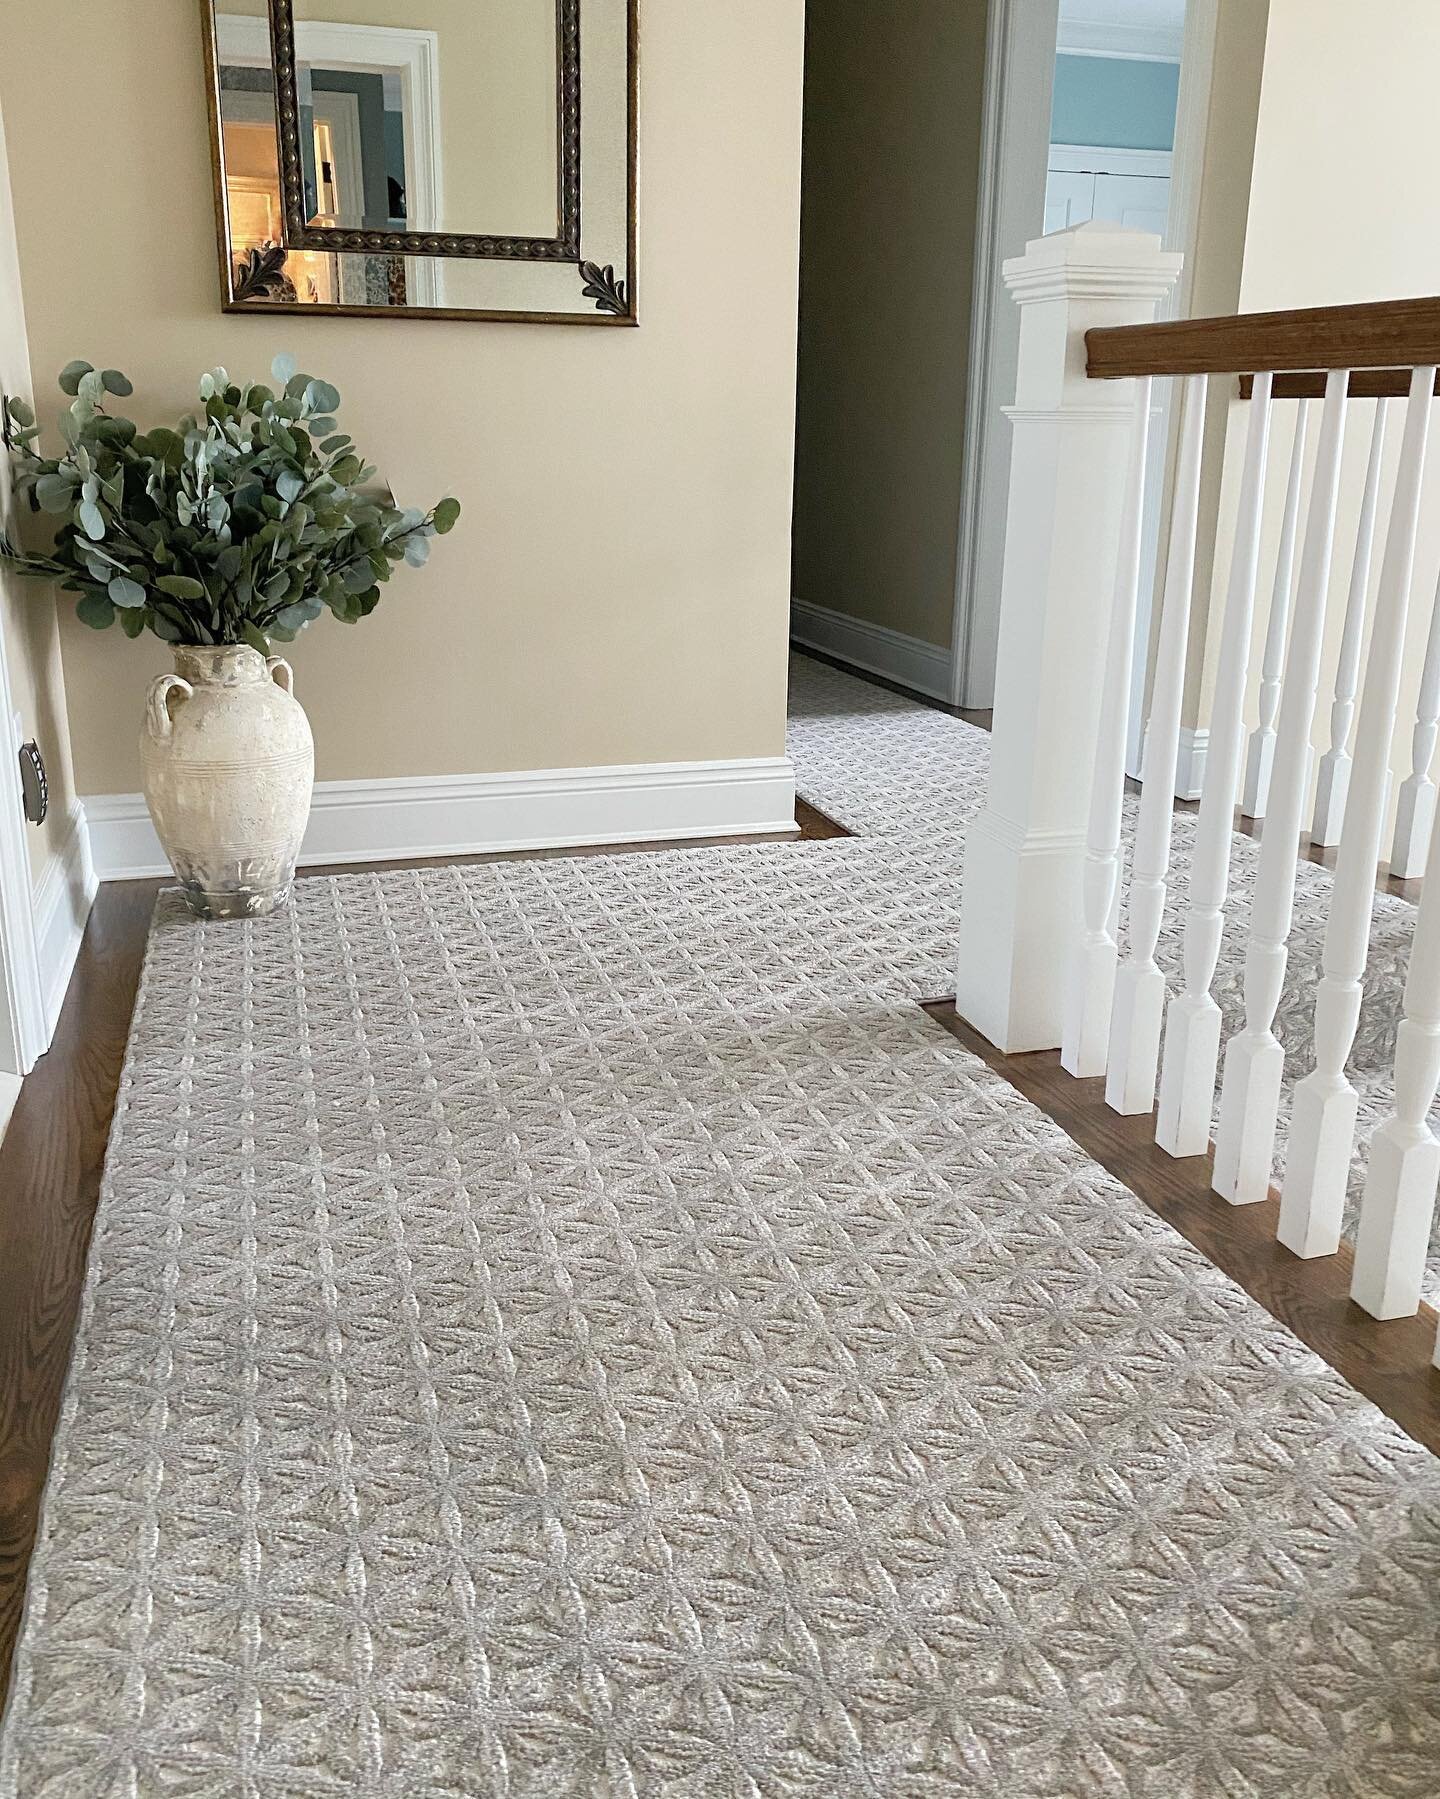 Like it was there all along&hellip;

Still stars in my eyes for this one. Sometimes you pick the right style, and sometimes you pick *the right style* for a home. @andersontuftex #picturepurrfect #andersontuftexpicturepurrfect